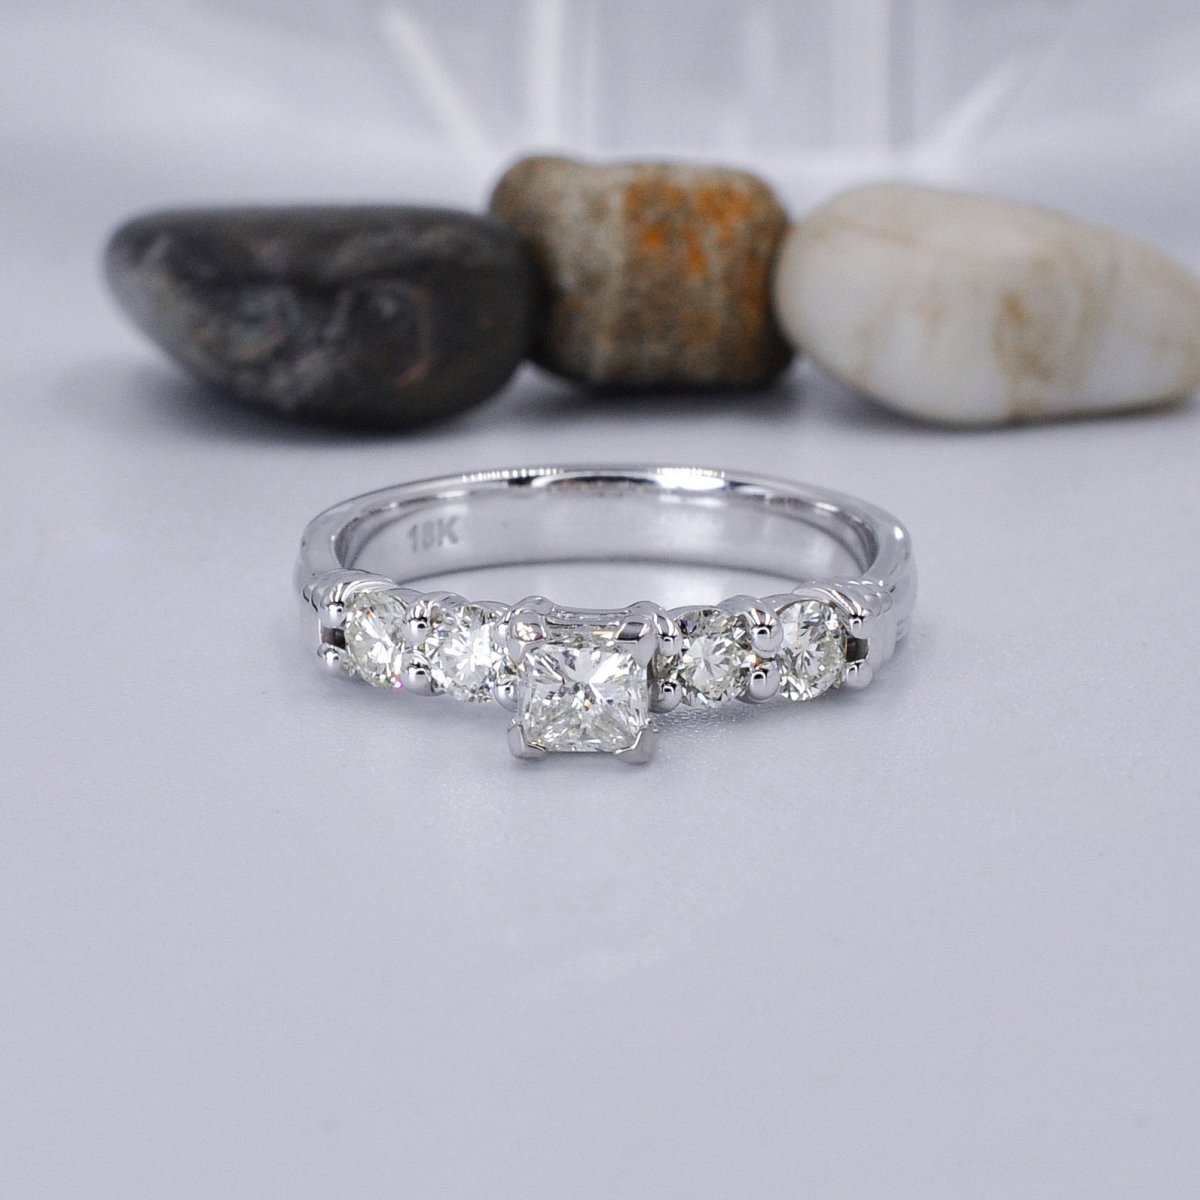 Exquisite 1.00 CT Princess and Round Cut Diamond Engagement Ring in 18KT White Gold PSRI1329 - Primestyle.com